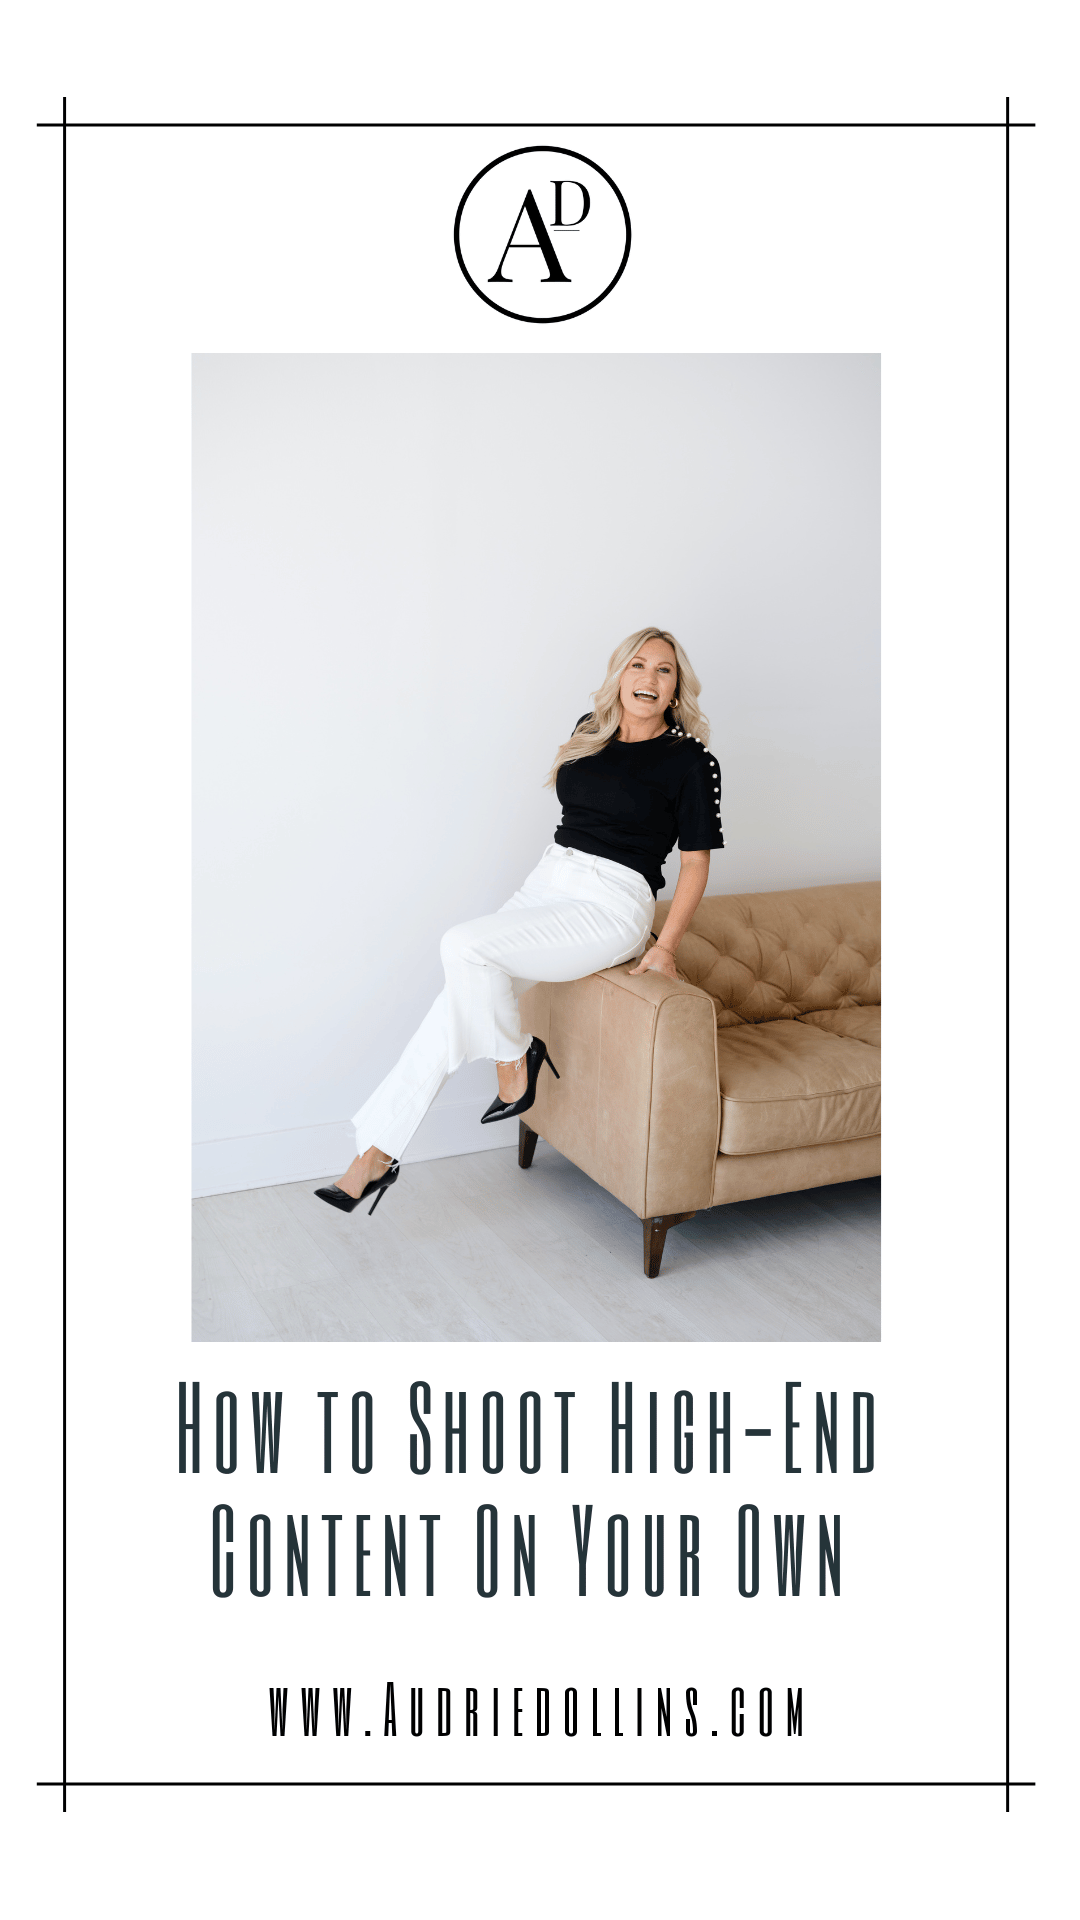 How to Shoot High End Content on Your Own 

#content #howto #shoot #dfwphotographer #shooting #contentsession #createcontent #self-shooting #timer #ringlight #marketingtips #audriedollins #admediagroup